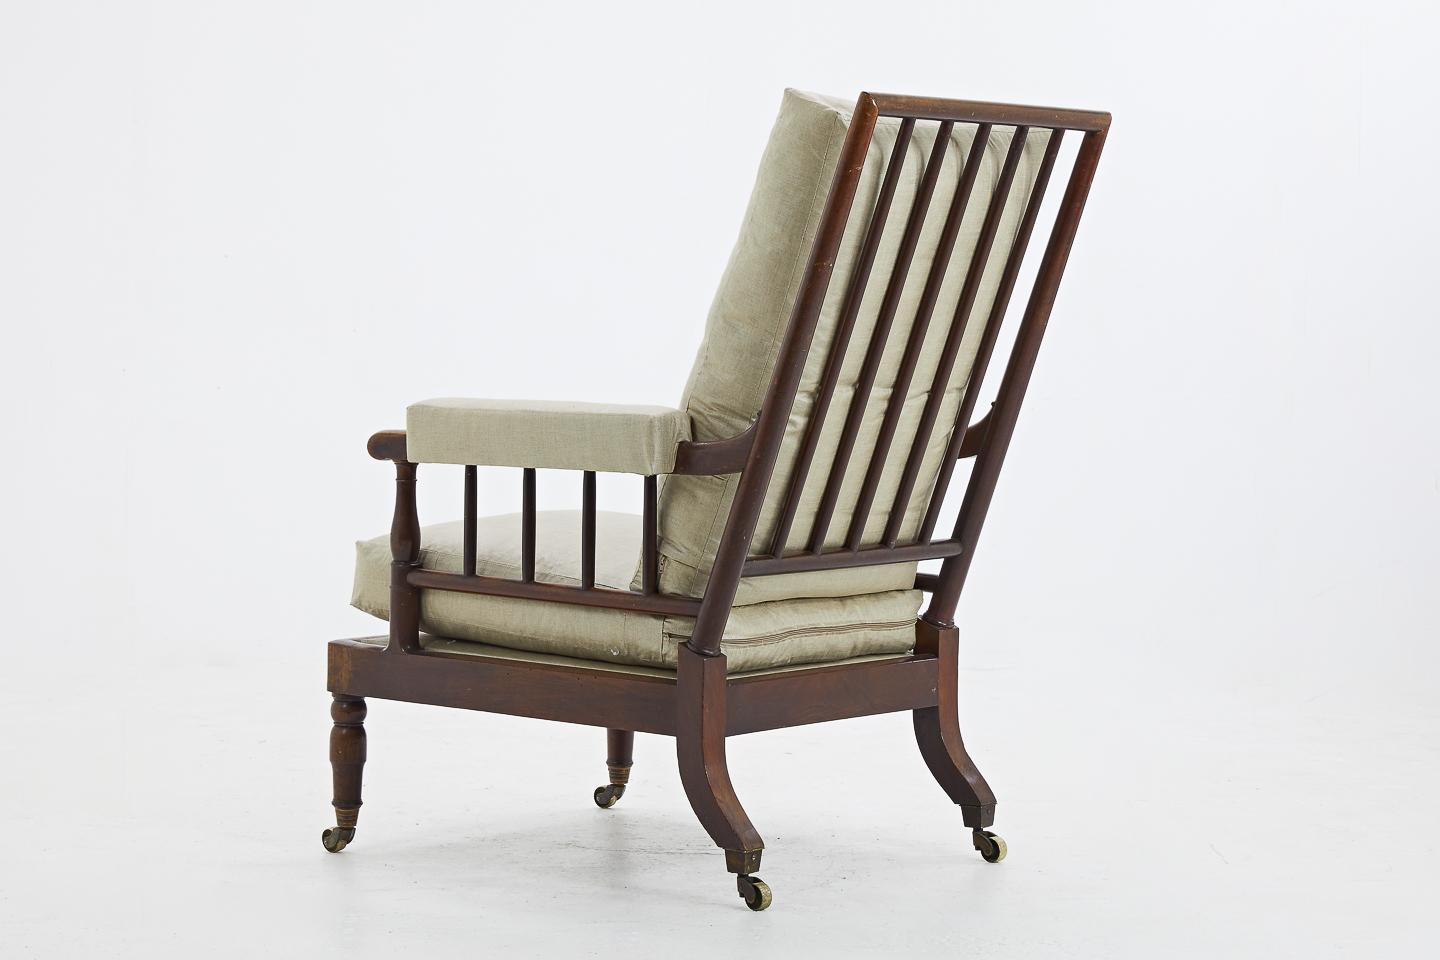 Early 19th Century French Mahogany Armchair In Good Condition For Sale In Husbands Bosworth, Leicestershire